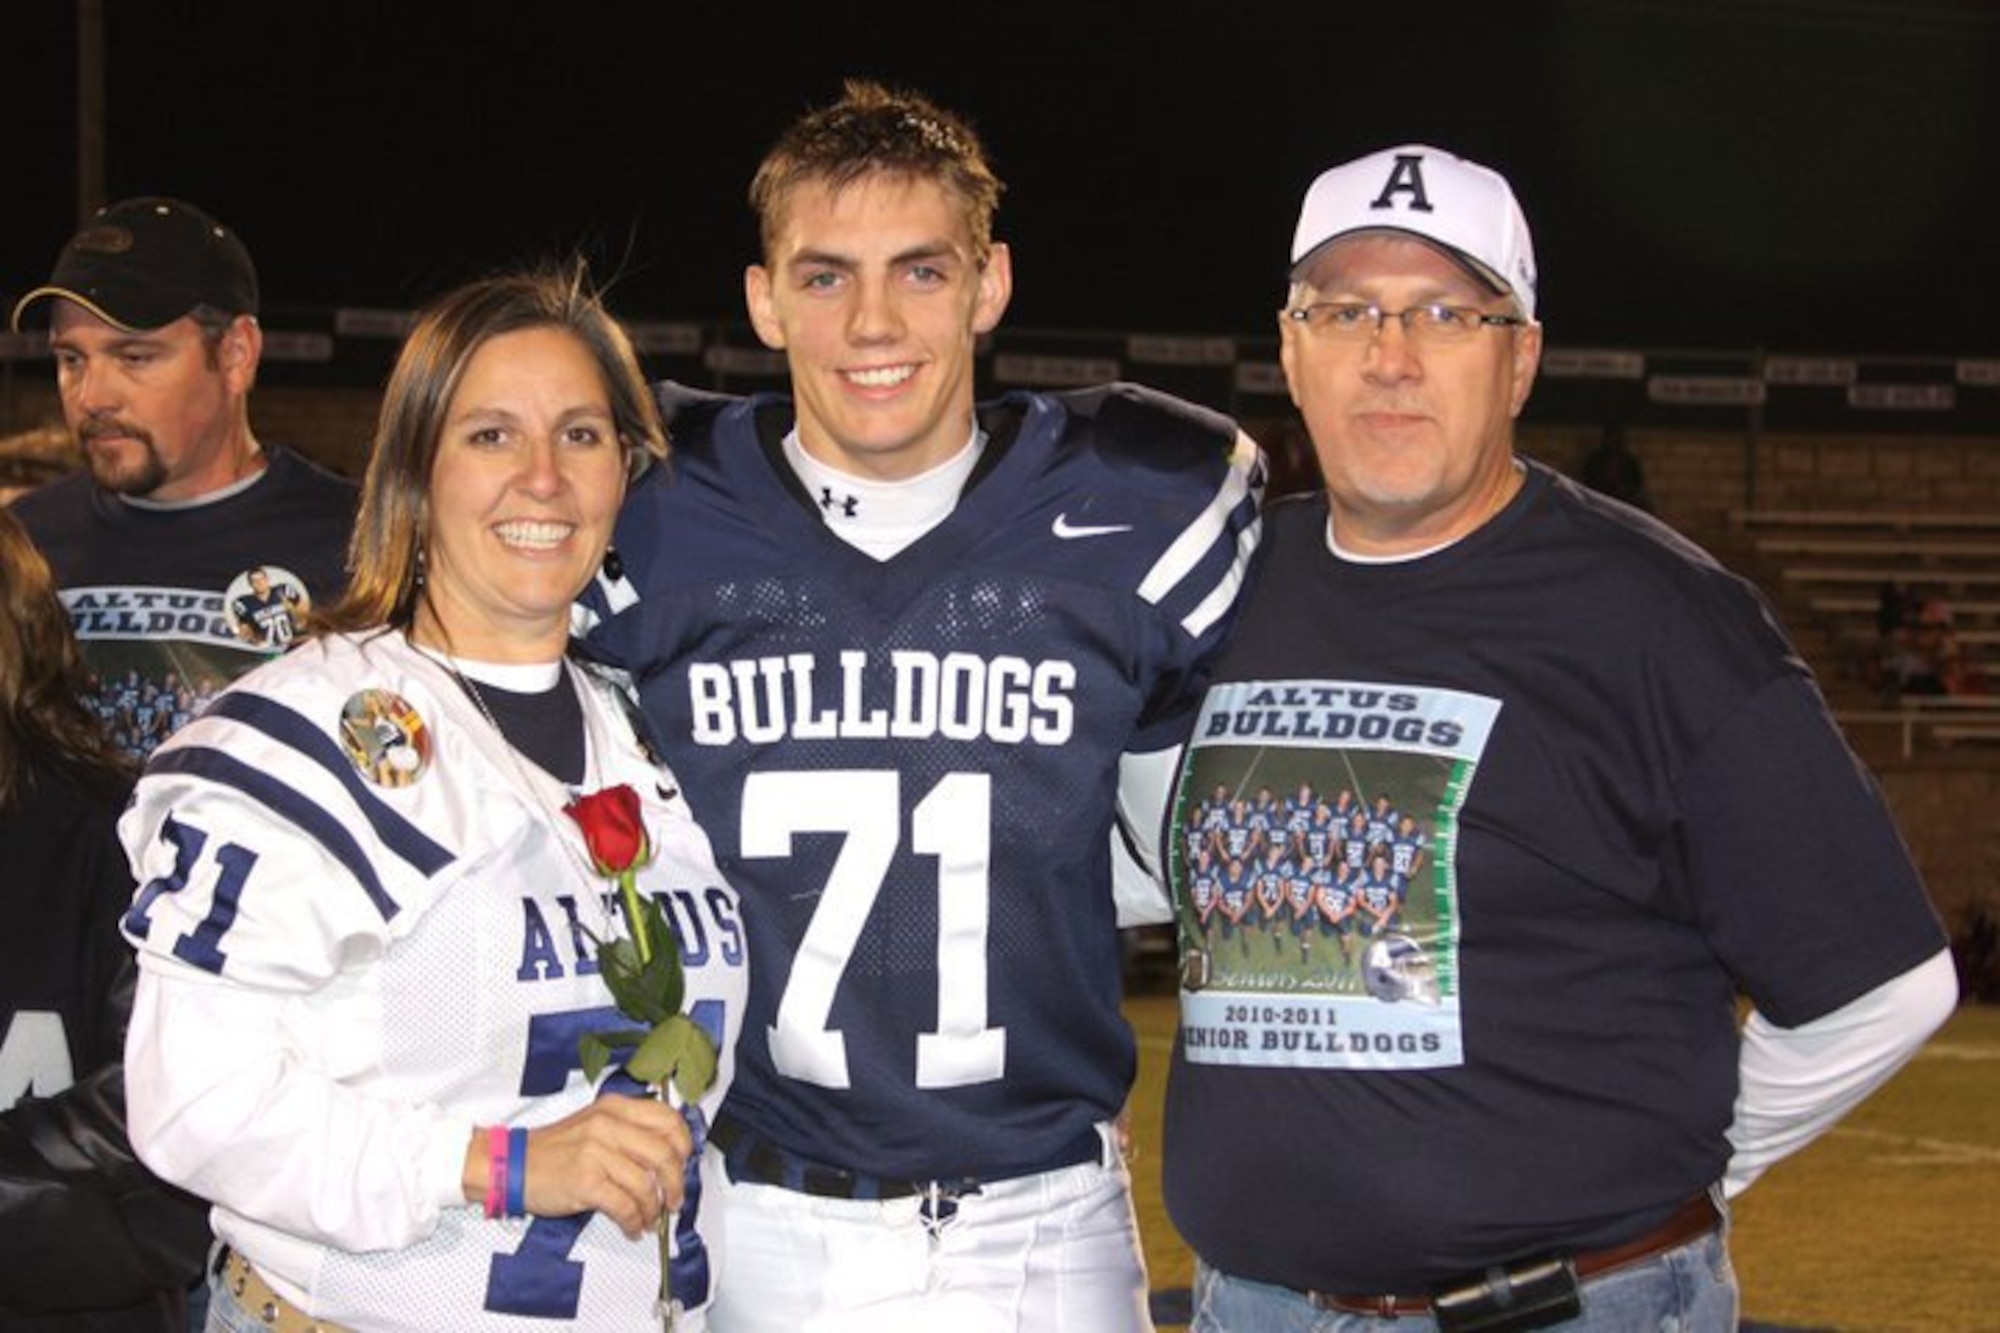 ALTUS AIR FORCE BASE, Okla. – Jeremy Delzer poses for a photo with his parents, Jaretta and Scott Delzer, at the Altus High School football stadium November 16, 2010. Since graduating in 2011, Delzer has joined the U.S. Air Force Academy with plans to commission and pursue a career as a pilot or an Intelligence officer. (Courtesy photo) 